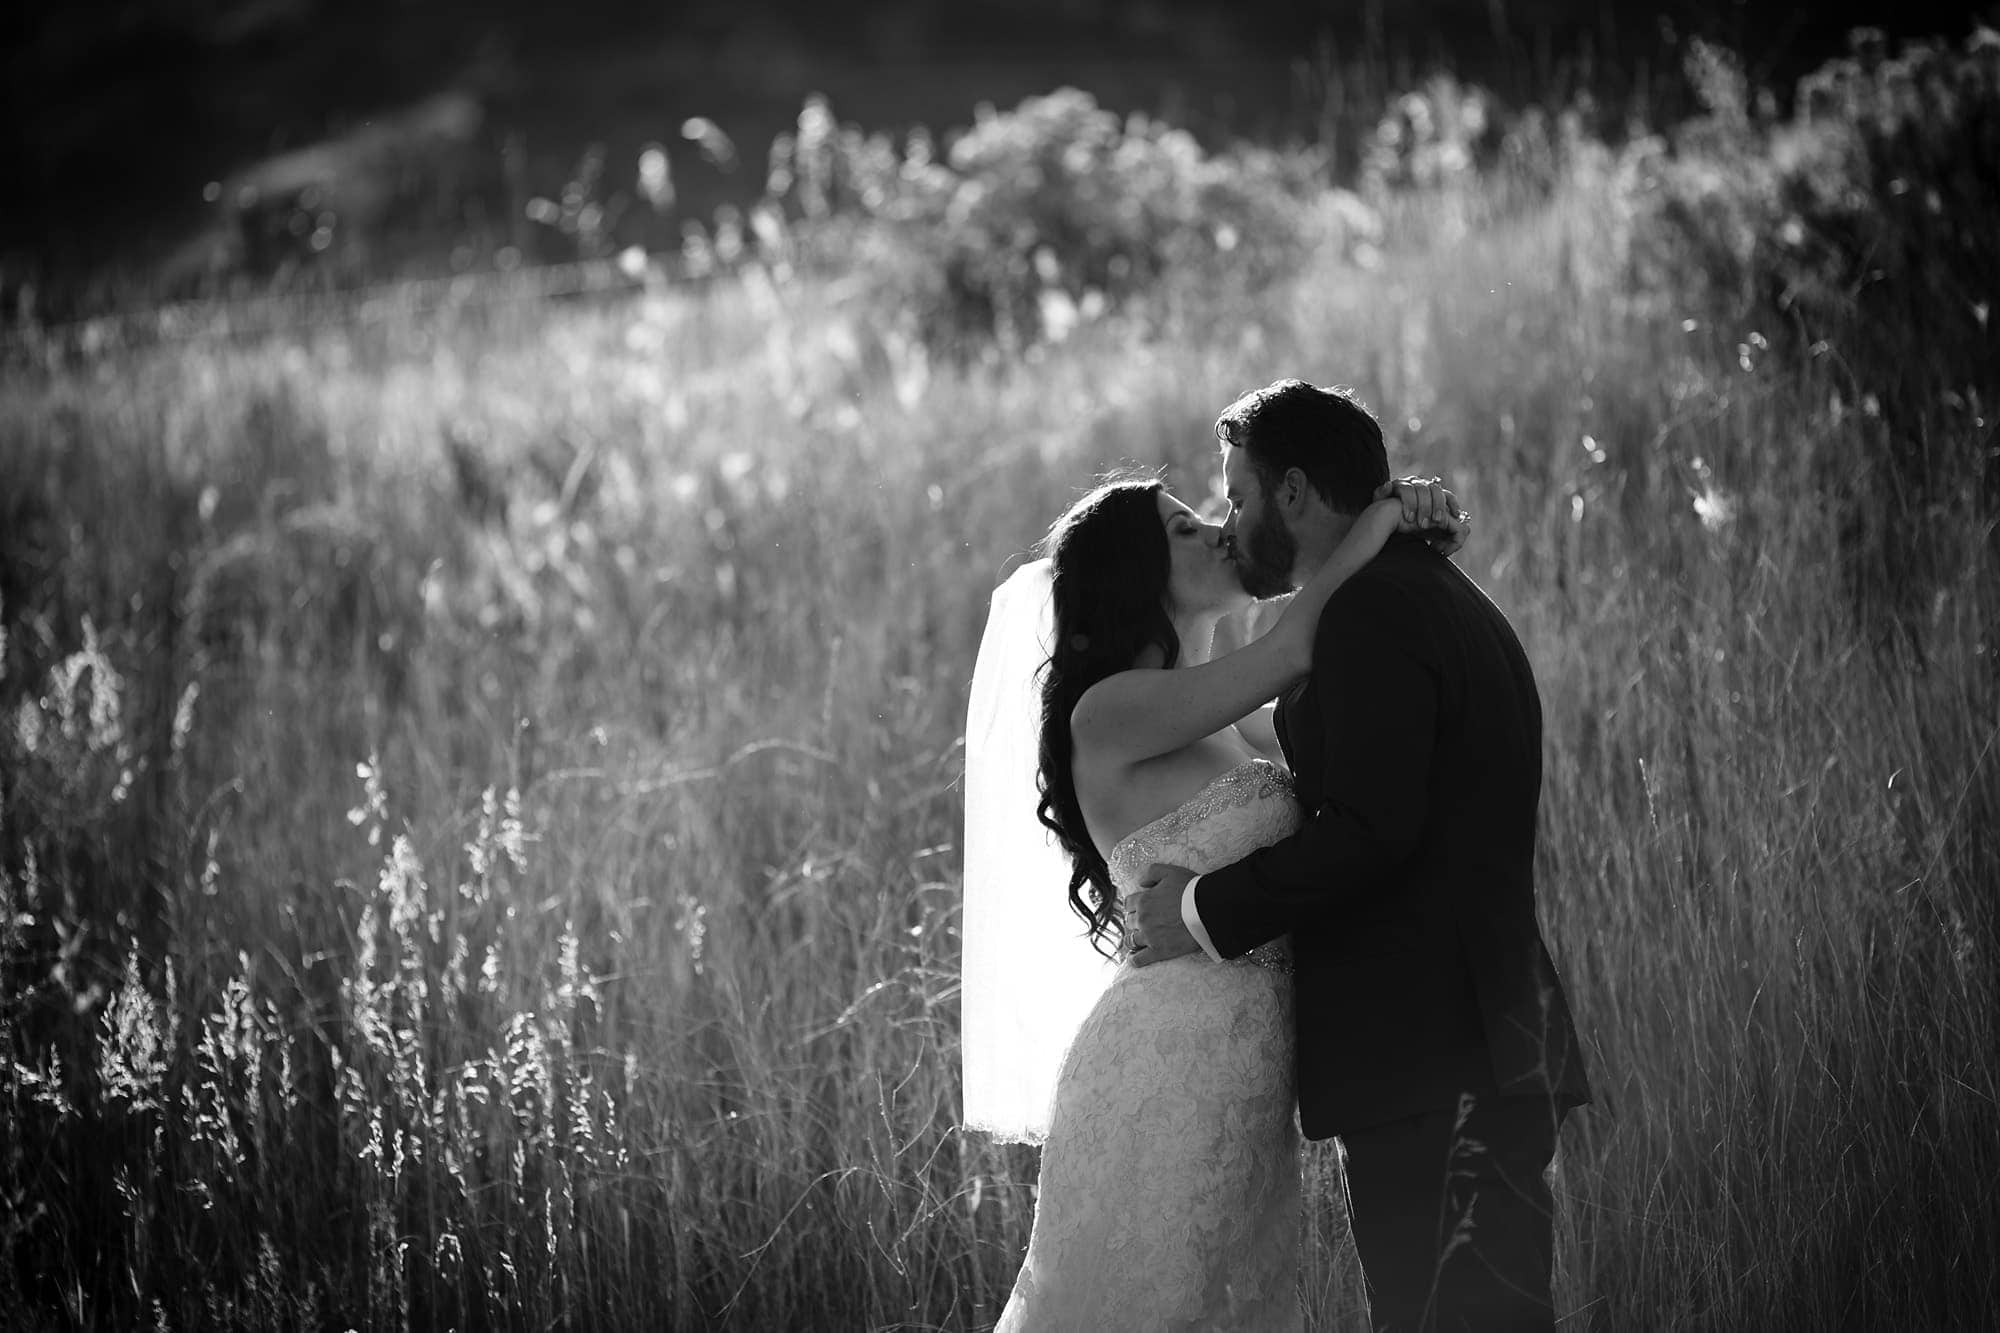 Blake and Gina kiss in the tall grass after their wedding under a tree in Morrison, Colorado